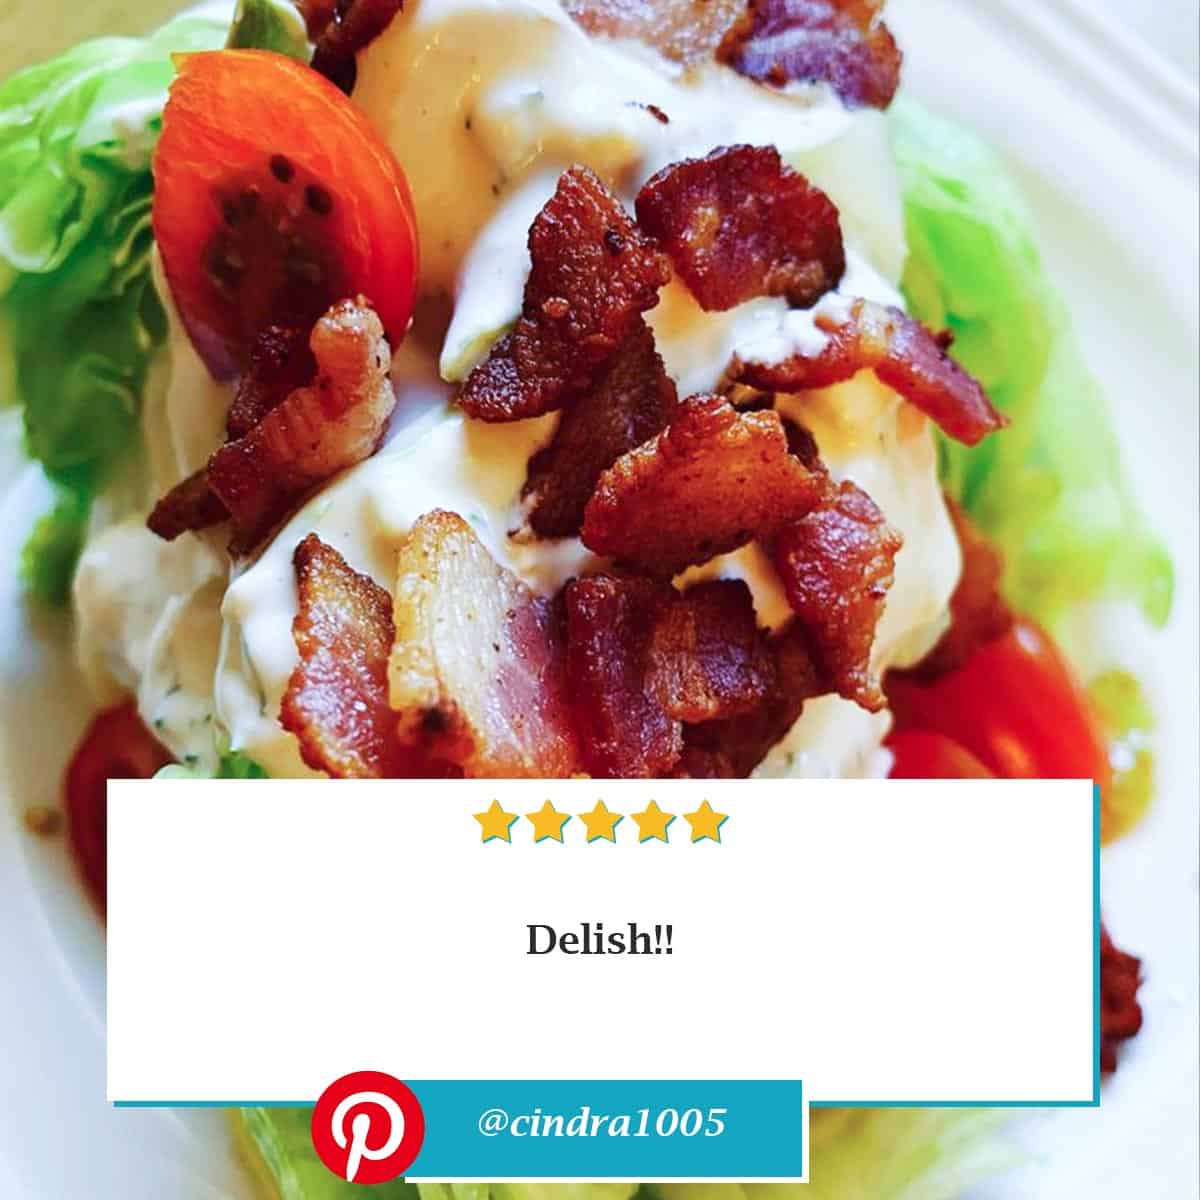 Reviewer photo of the Blue Cheese Dressing on a wedge salad with bacon with the comment: "Delish!!" and their Pinterest username @cindra1005